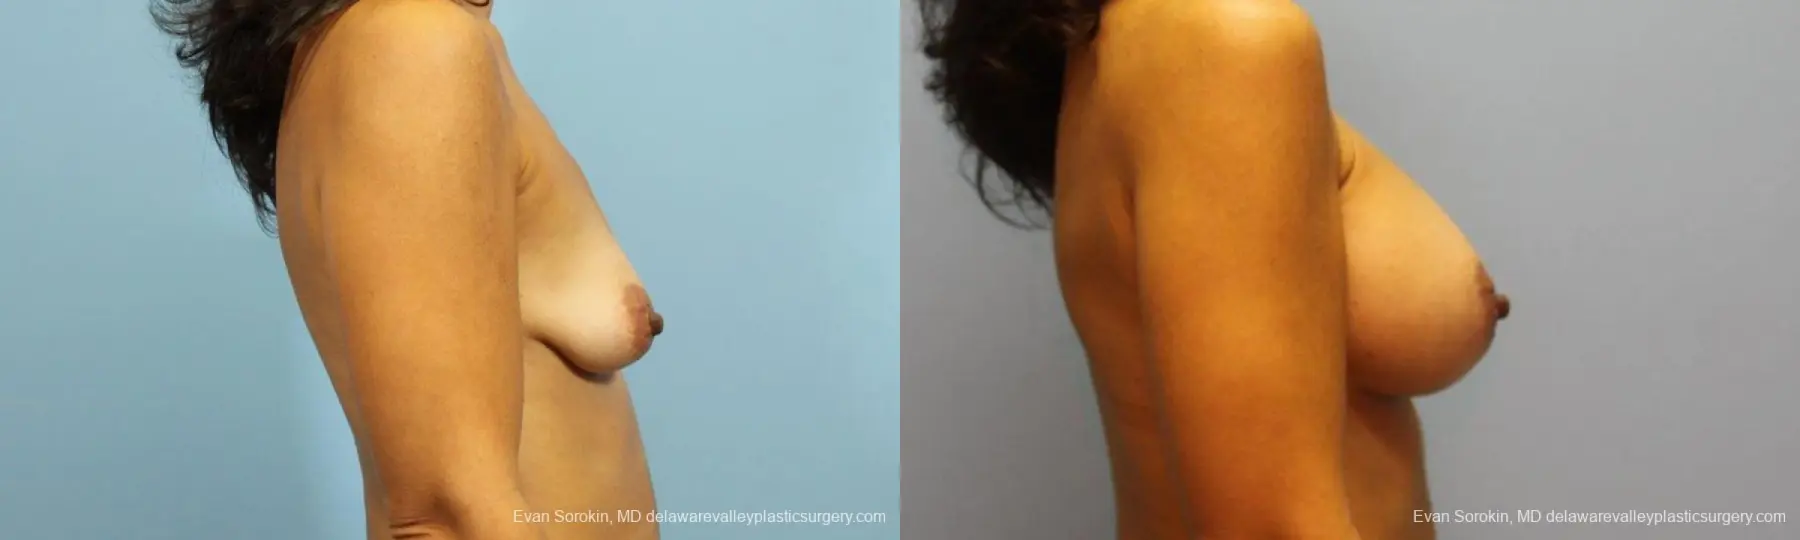 Philadelphia Breast Augmentation 9422 - Before and After 3